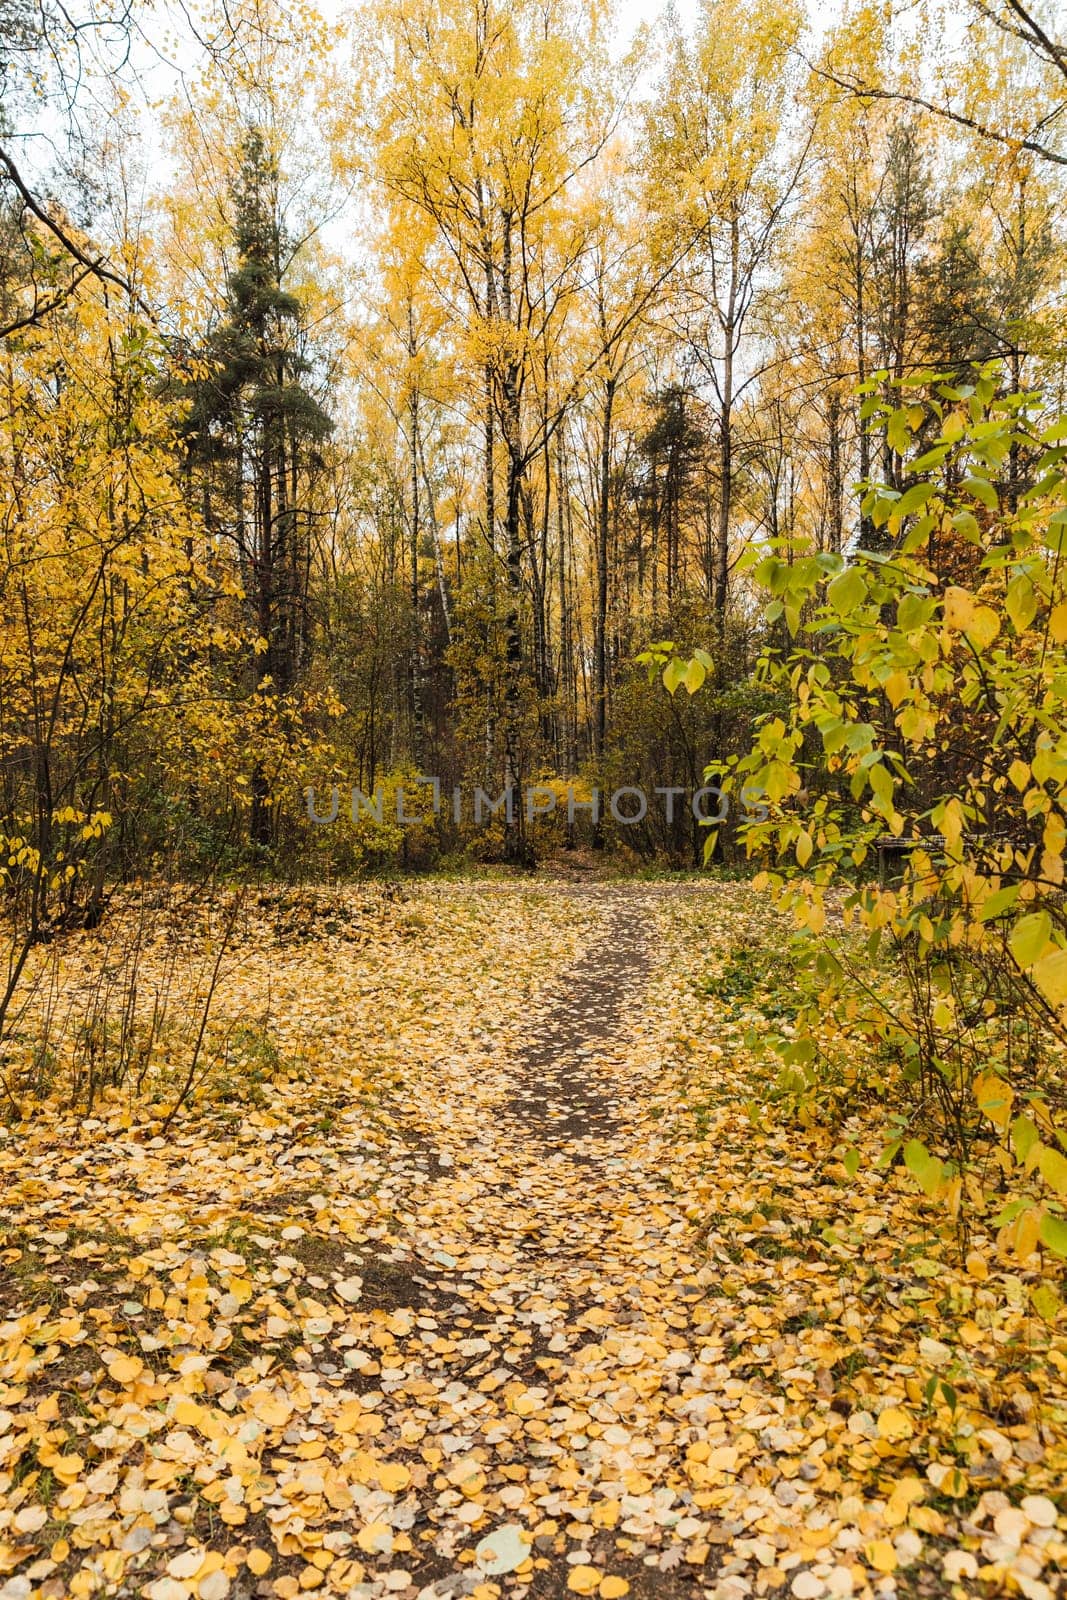 yellow leaves on the ground trees autumn walk nature travel hiking by Simakov